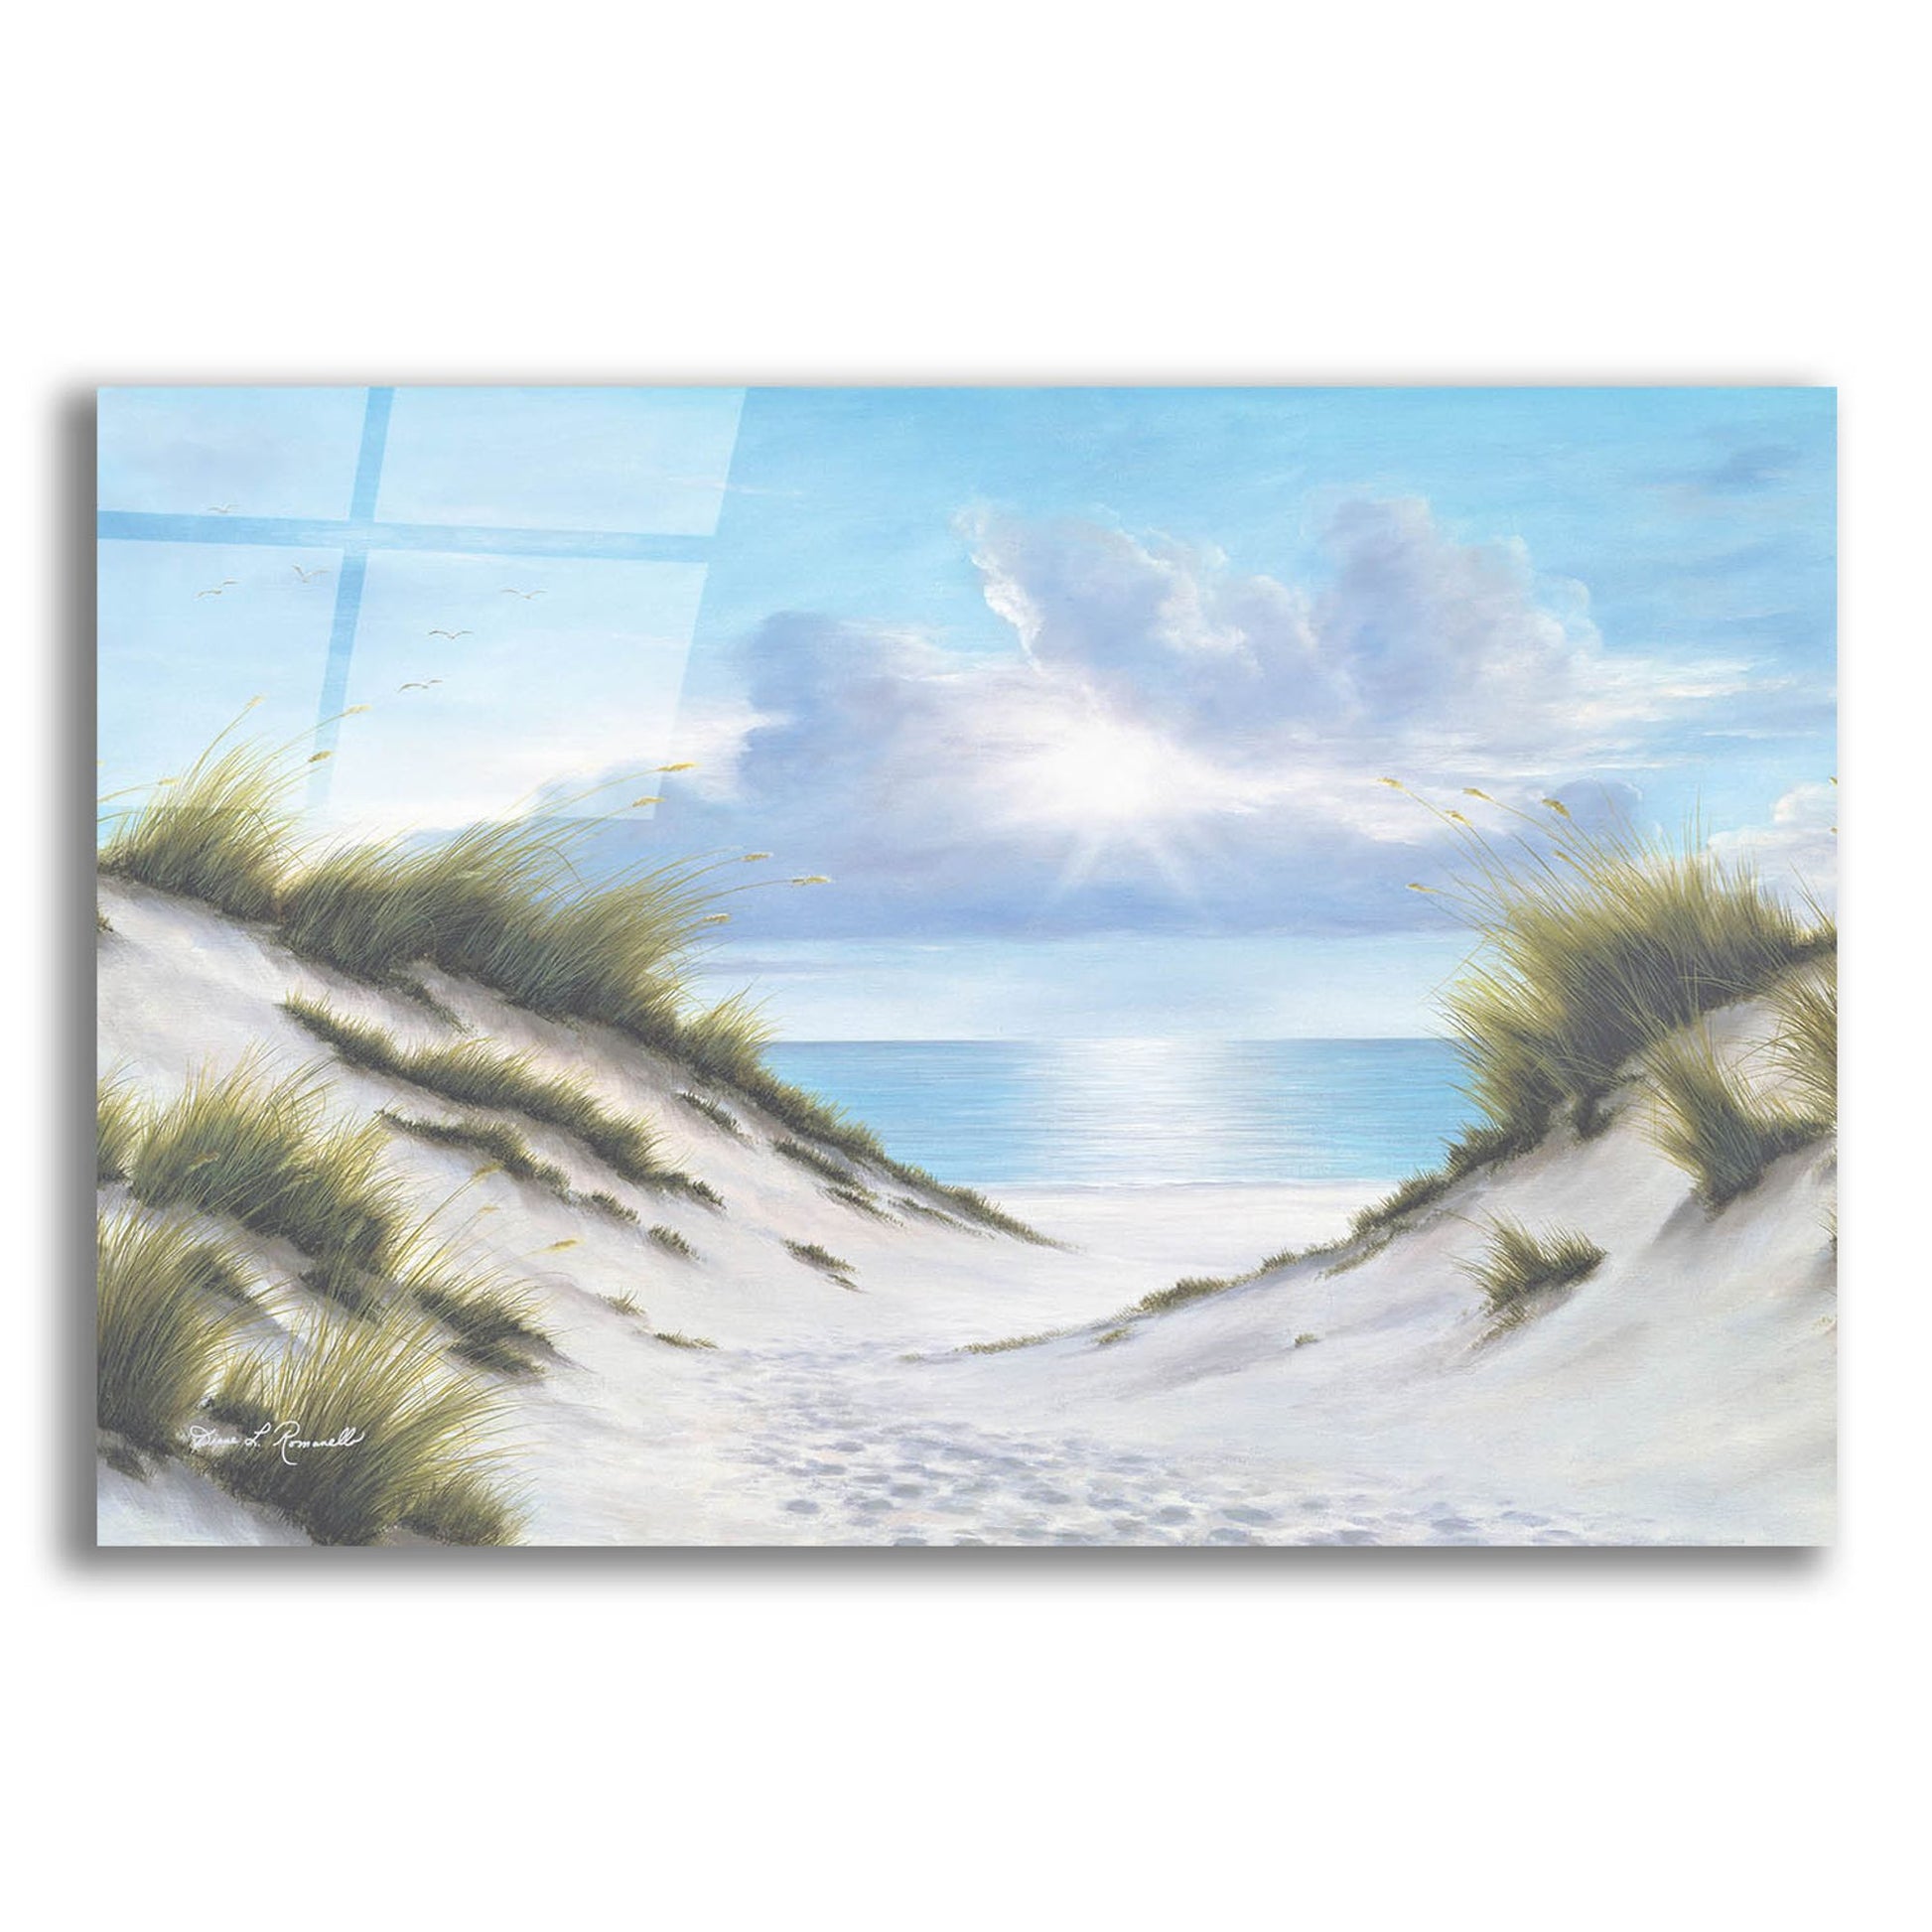 Epic Art ' Sand and Sea' by Diane Romanello, Acrylic Glass Wall Art,16x12